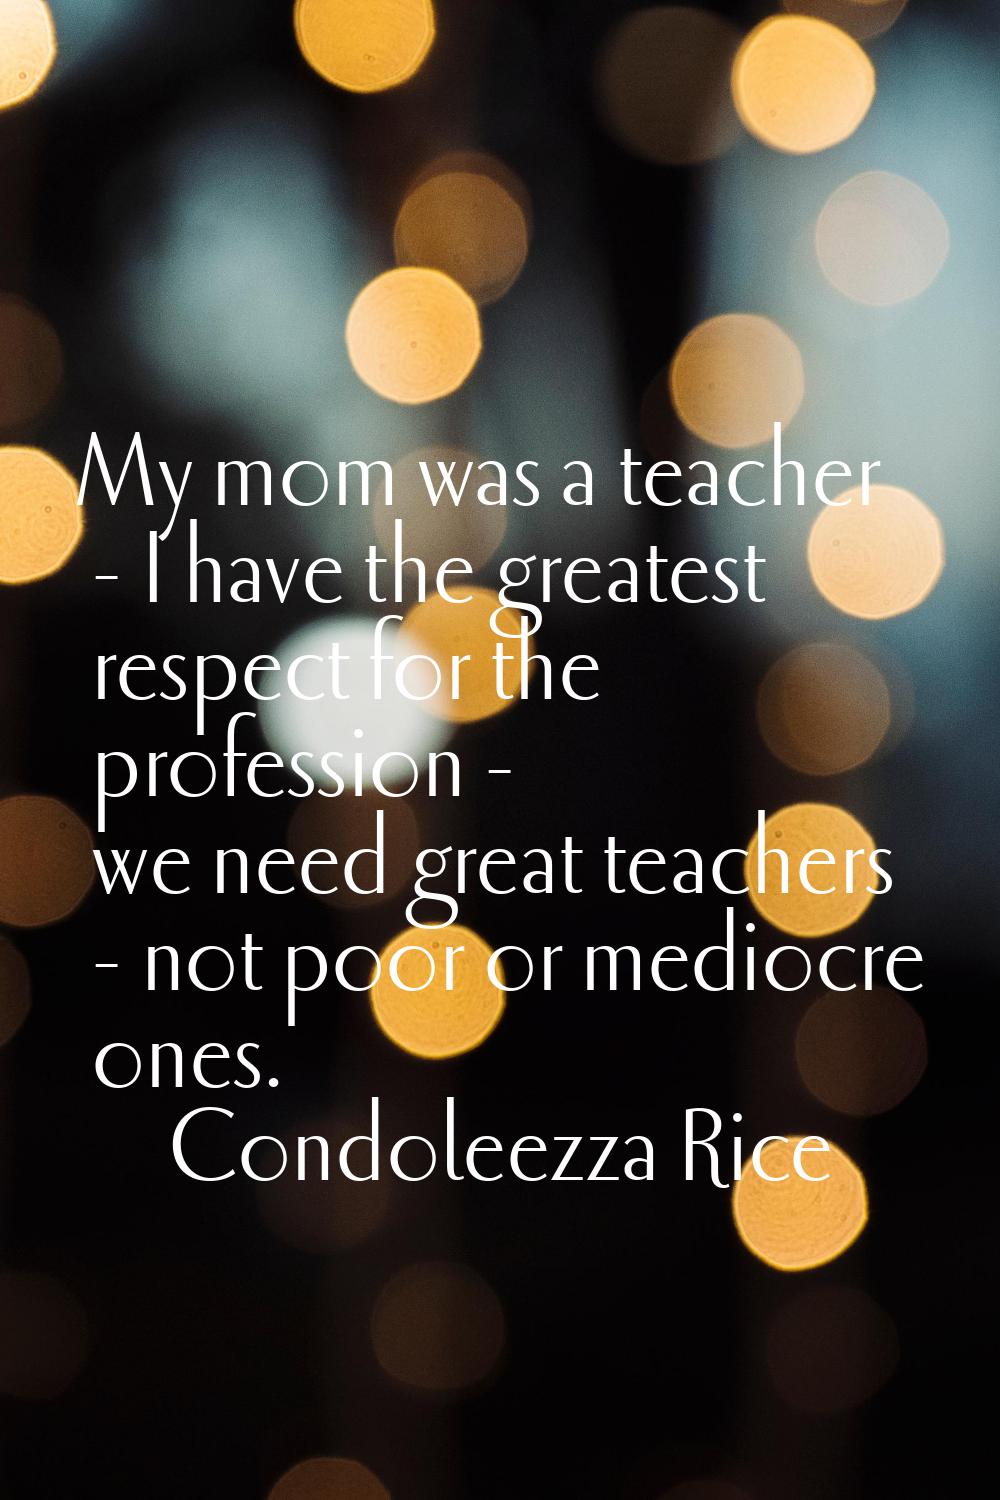 My mom was a teacher - I have the greatest respect for the profession - we need great teachers - no